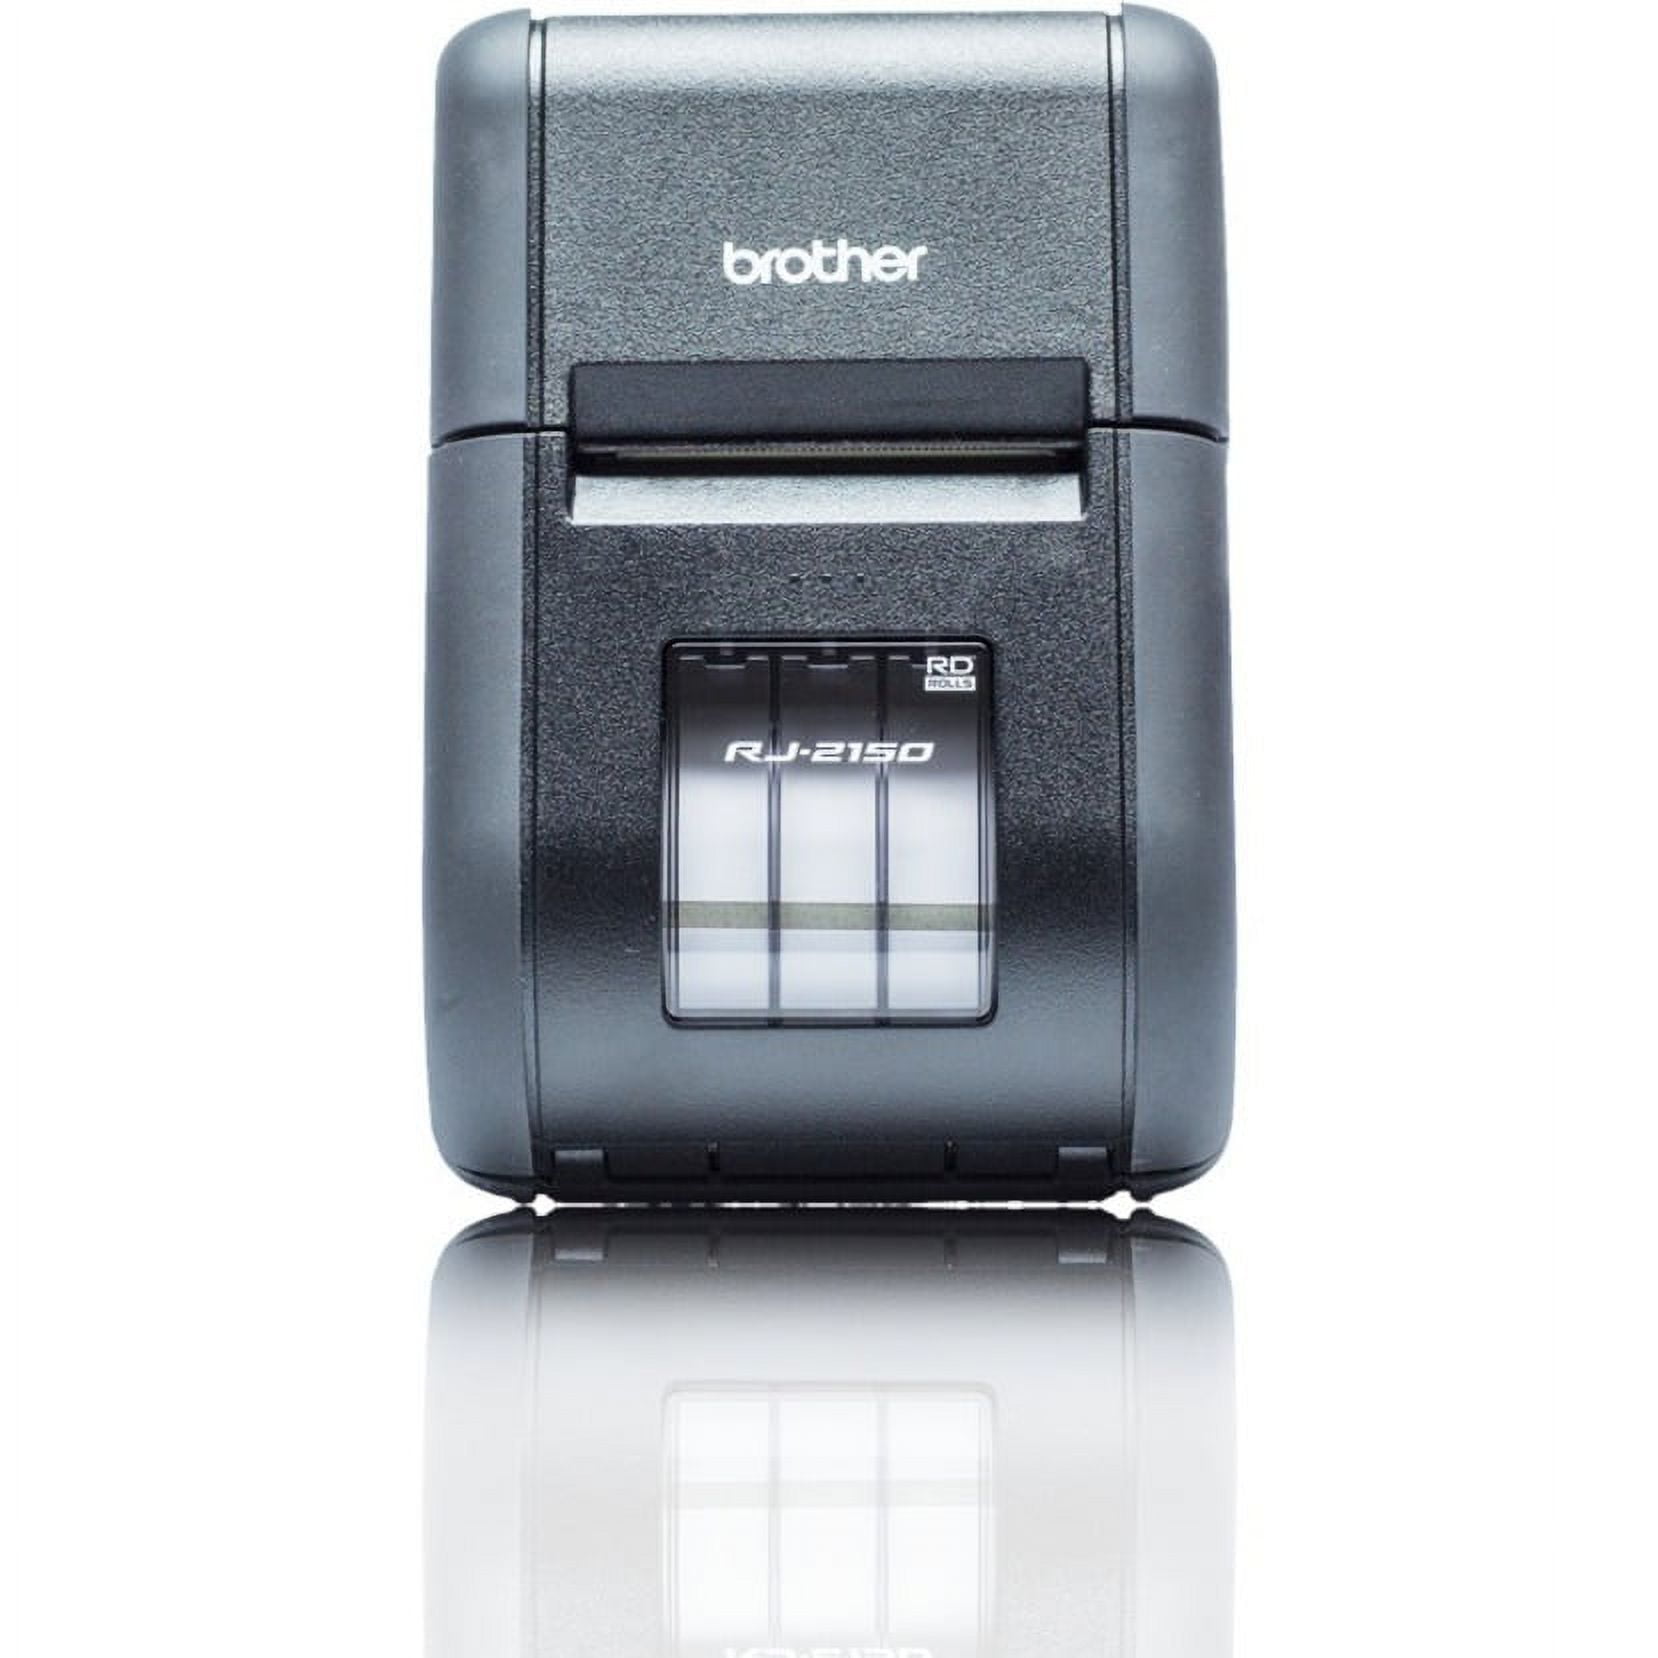 Brother RuggedJet RJ-2150 Direct Thermal Printer Monochrome Portable  Label/Receipt Print USB Bluetooth Battery Included